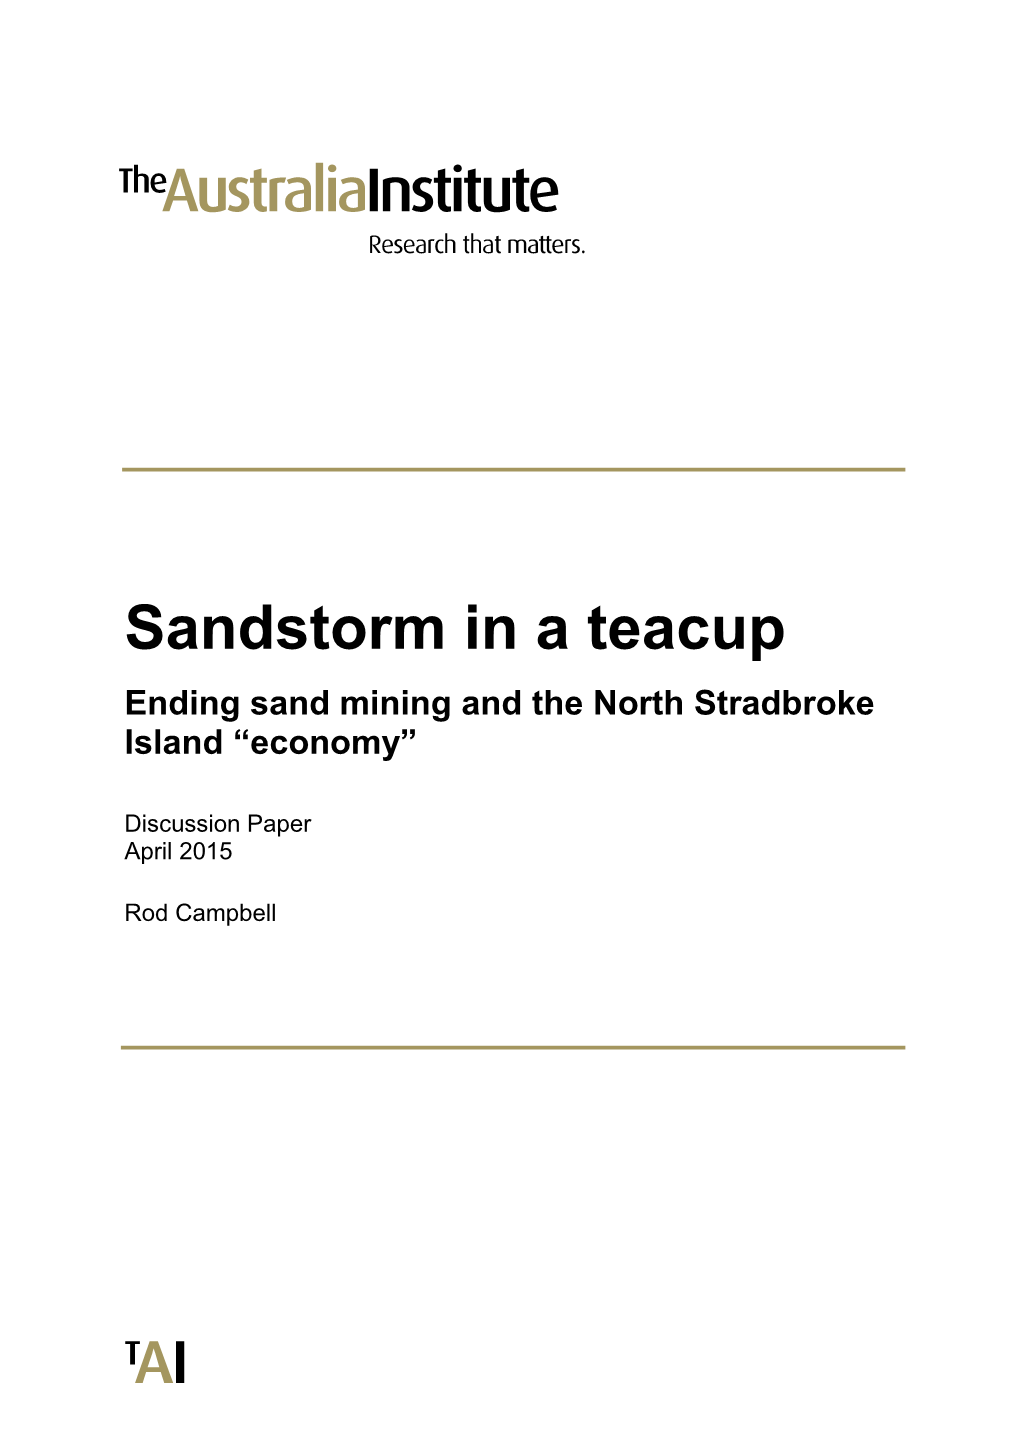 Sandstorm in a Teacup Ending Sand Mining and the North Stradbroke Island “Economy”